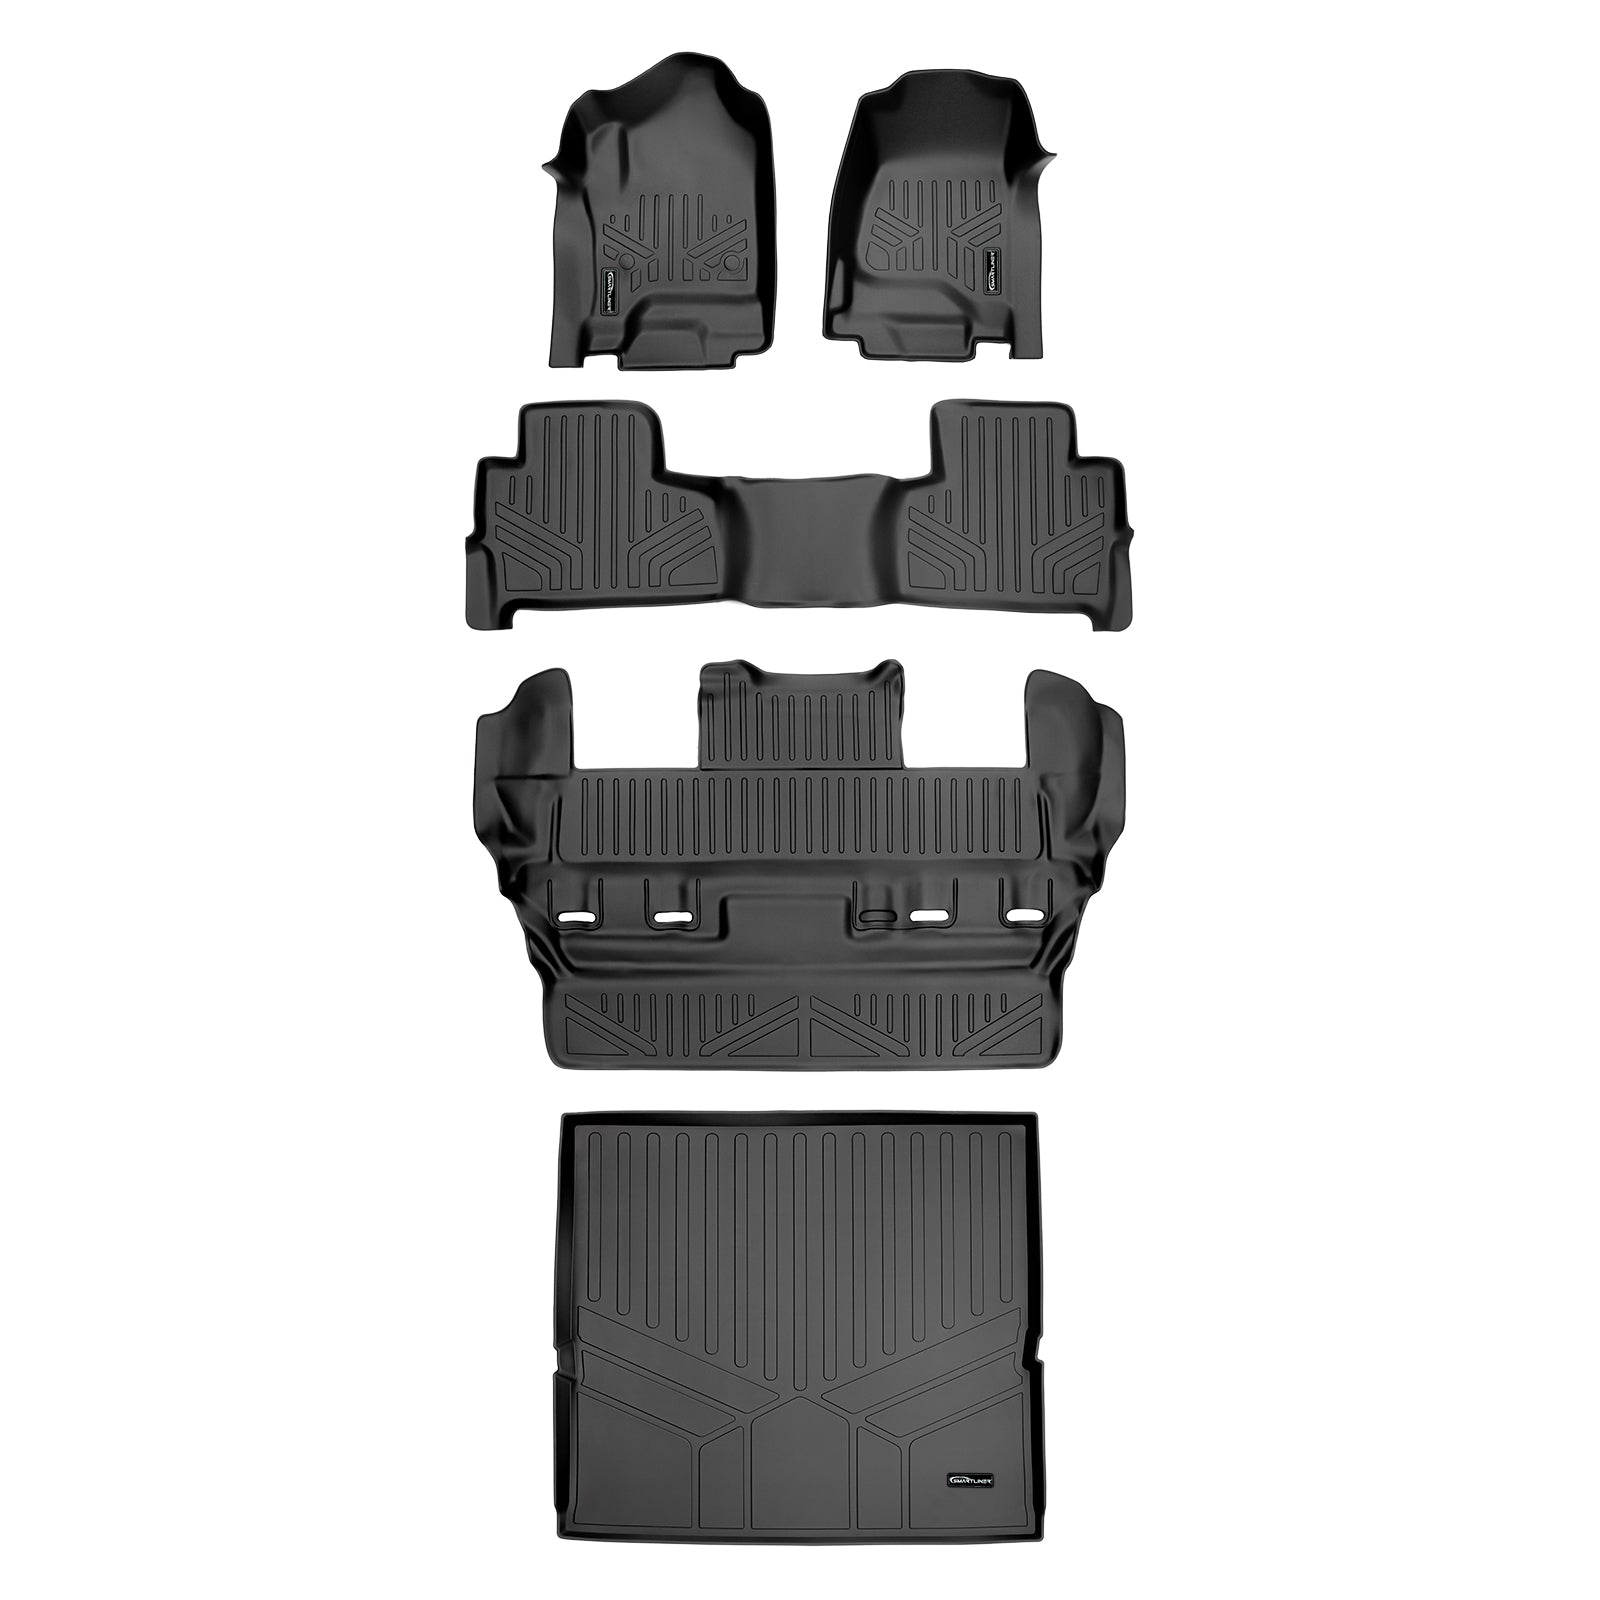 SMARTLINER Custom Fit Floor Liners For 2015-2020 Chevy Tahoe / GMC Yukon With 2nd Row Bucket Seats